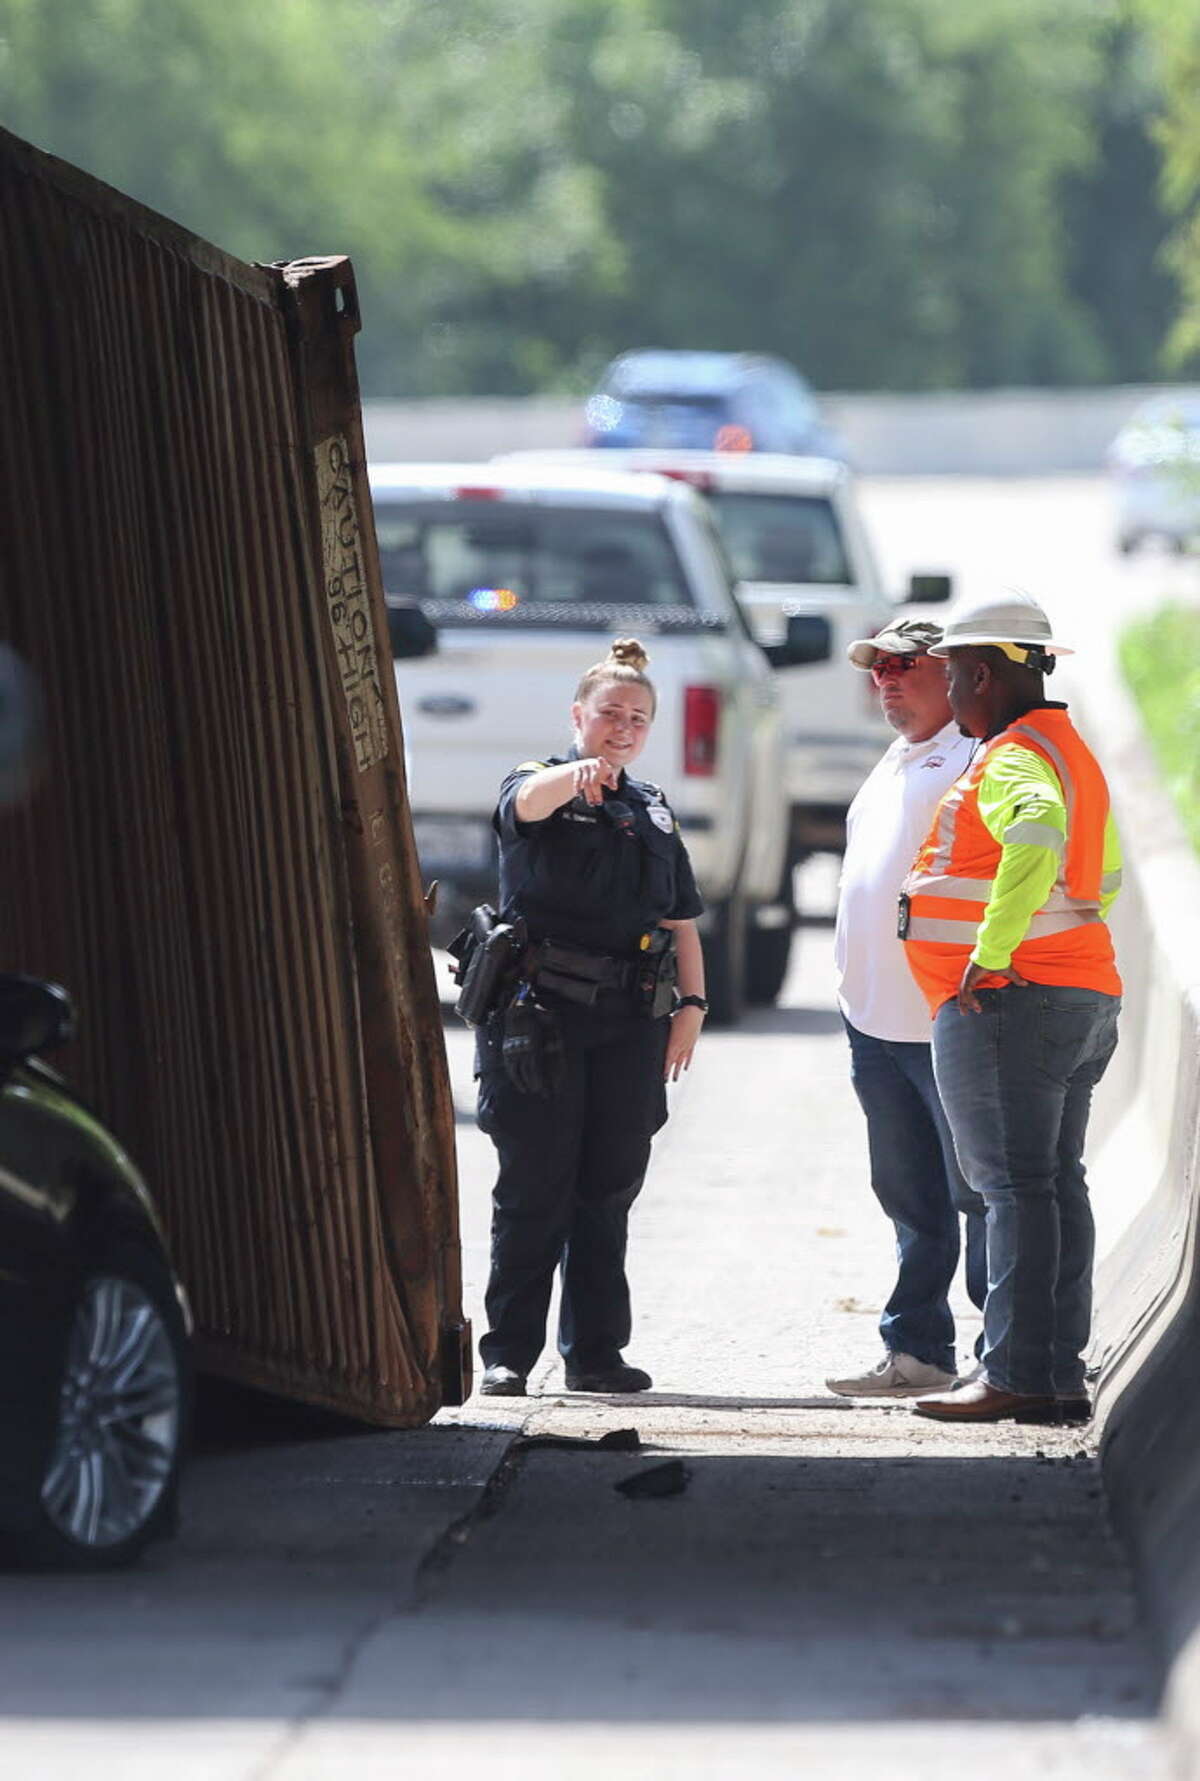 HPD officers and crew members work on a scene where a trailer truck struck the Houston Avenue bridge and its container fell onto a sedan vehicle on Monday, June 25, 2018, in Houston. Both drivers are not injured.